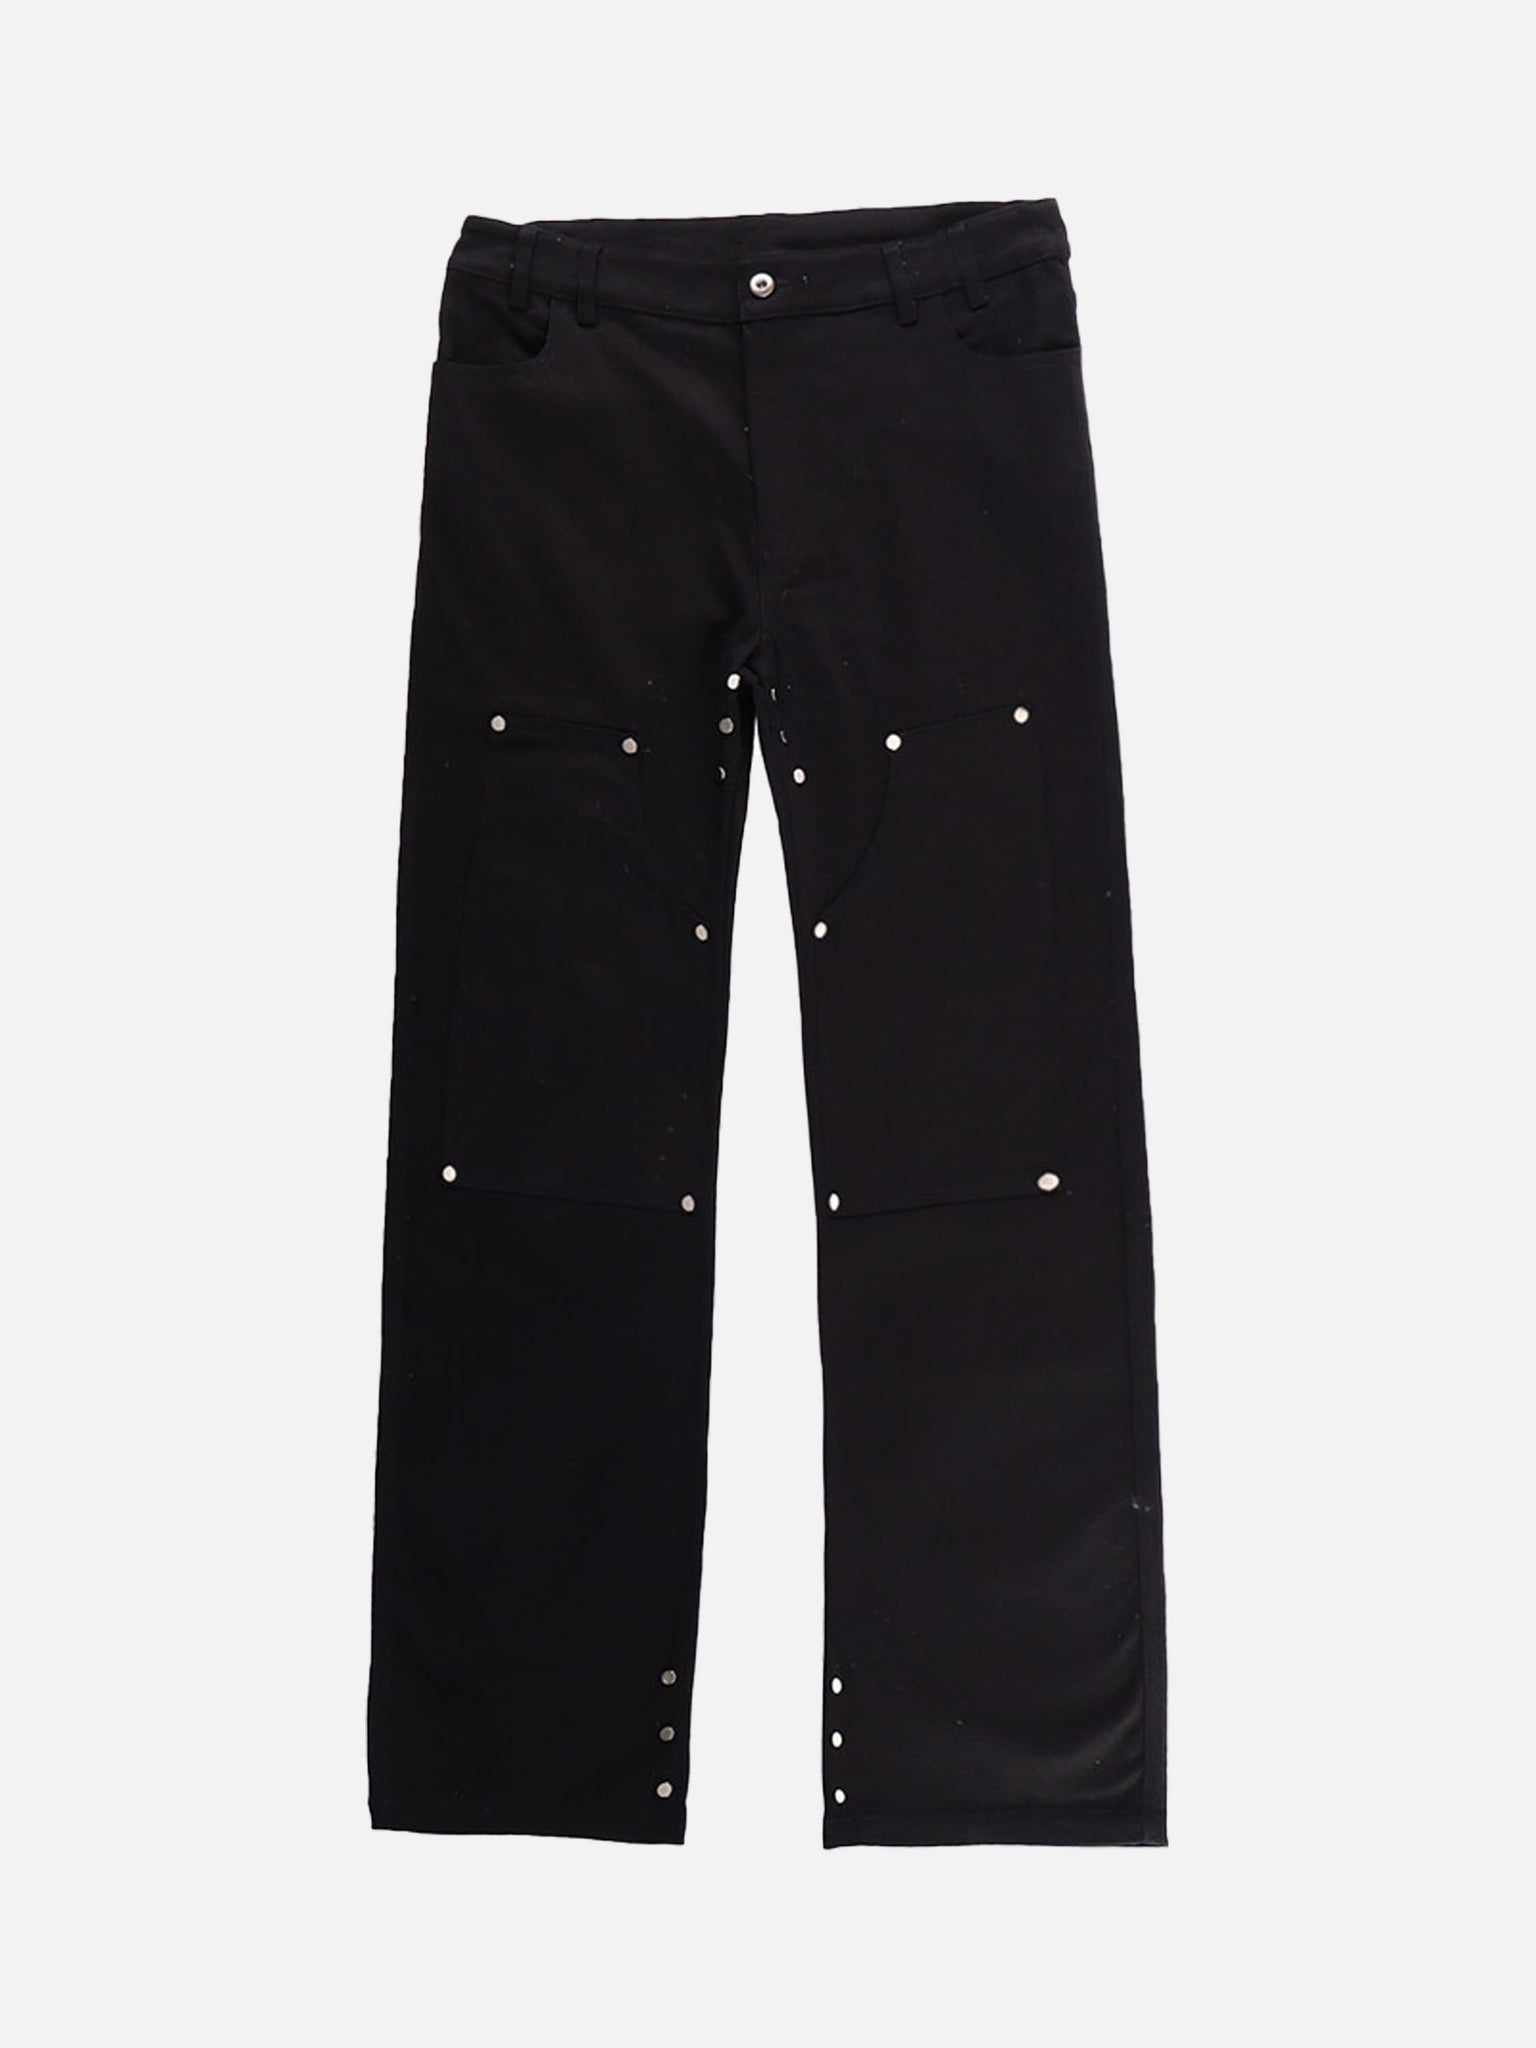 The Supermade American High Street Digital Embroidered Jeans